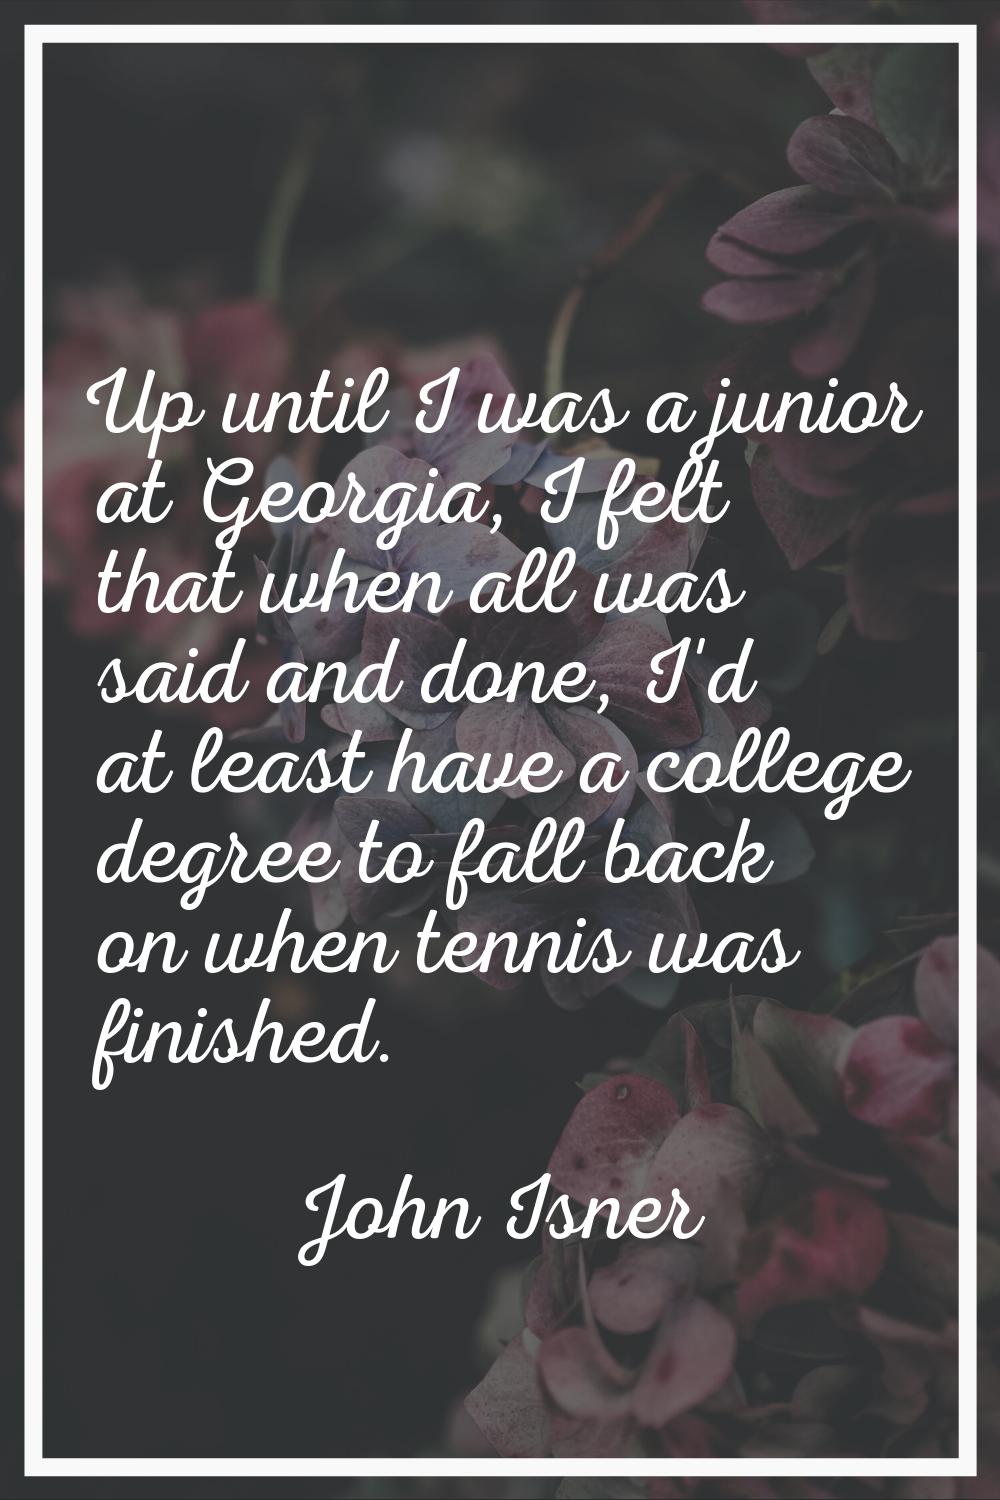 Up until I was a junior at Georgia, I felt that when all was said and done, I'd at least have a col